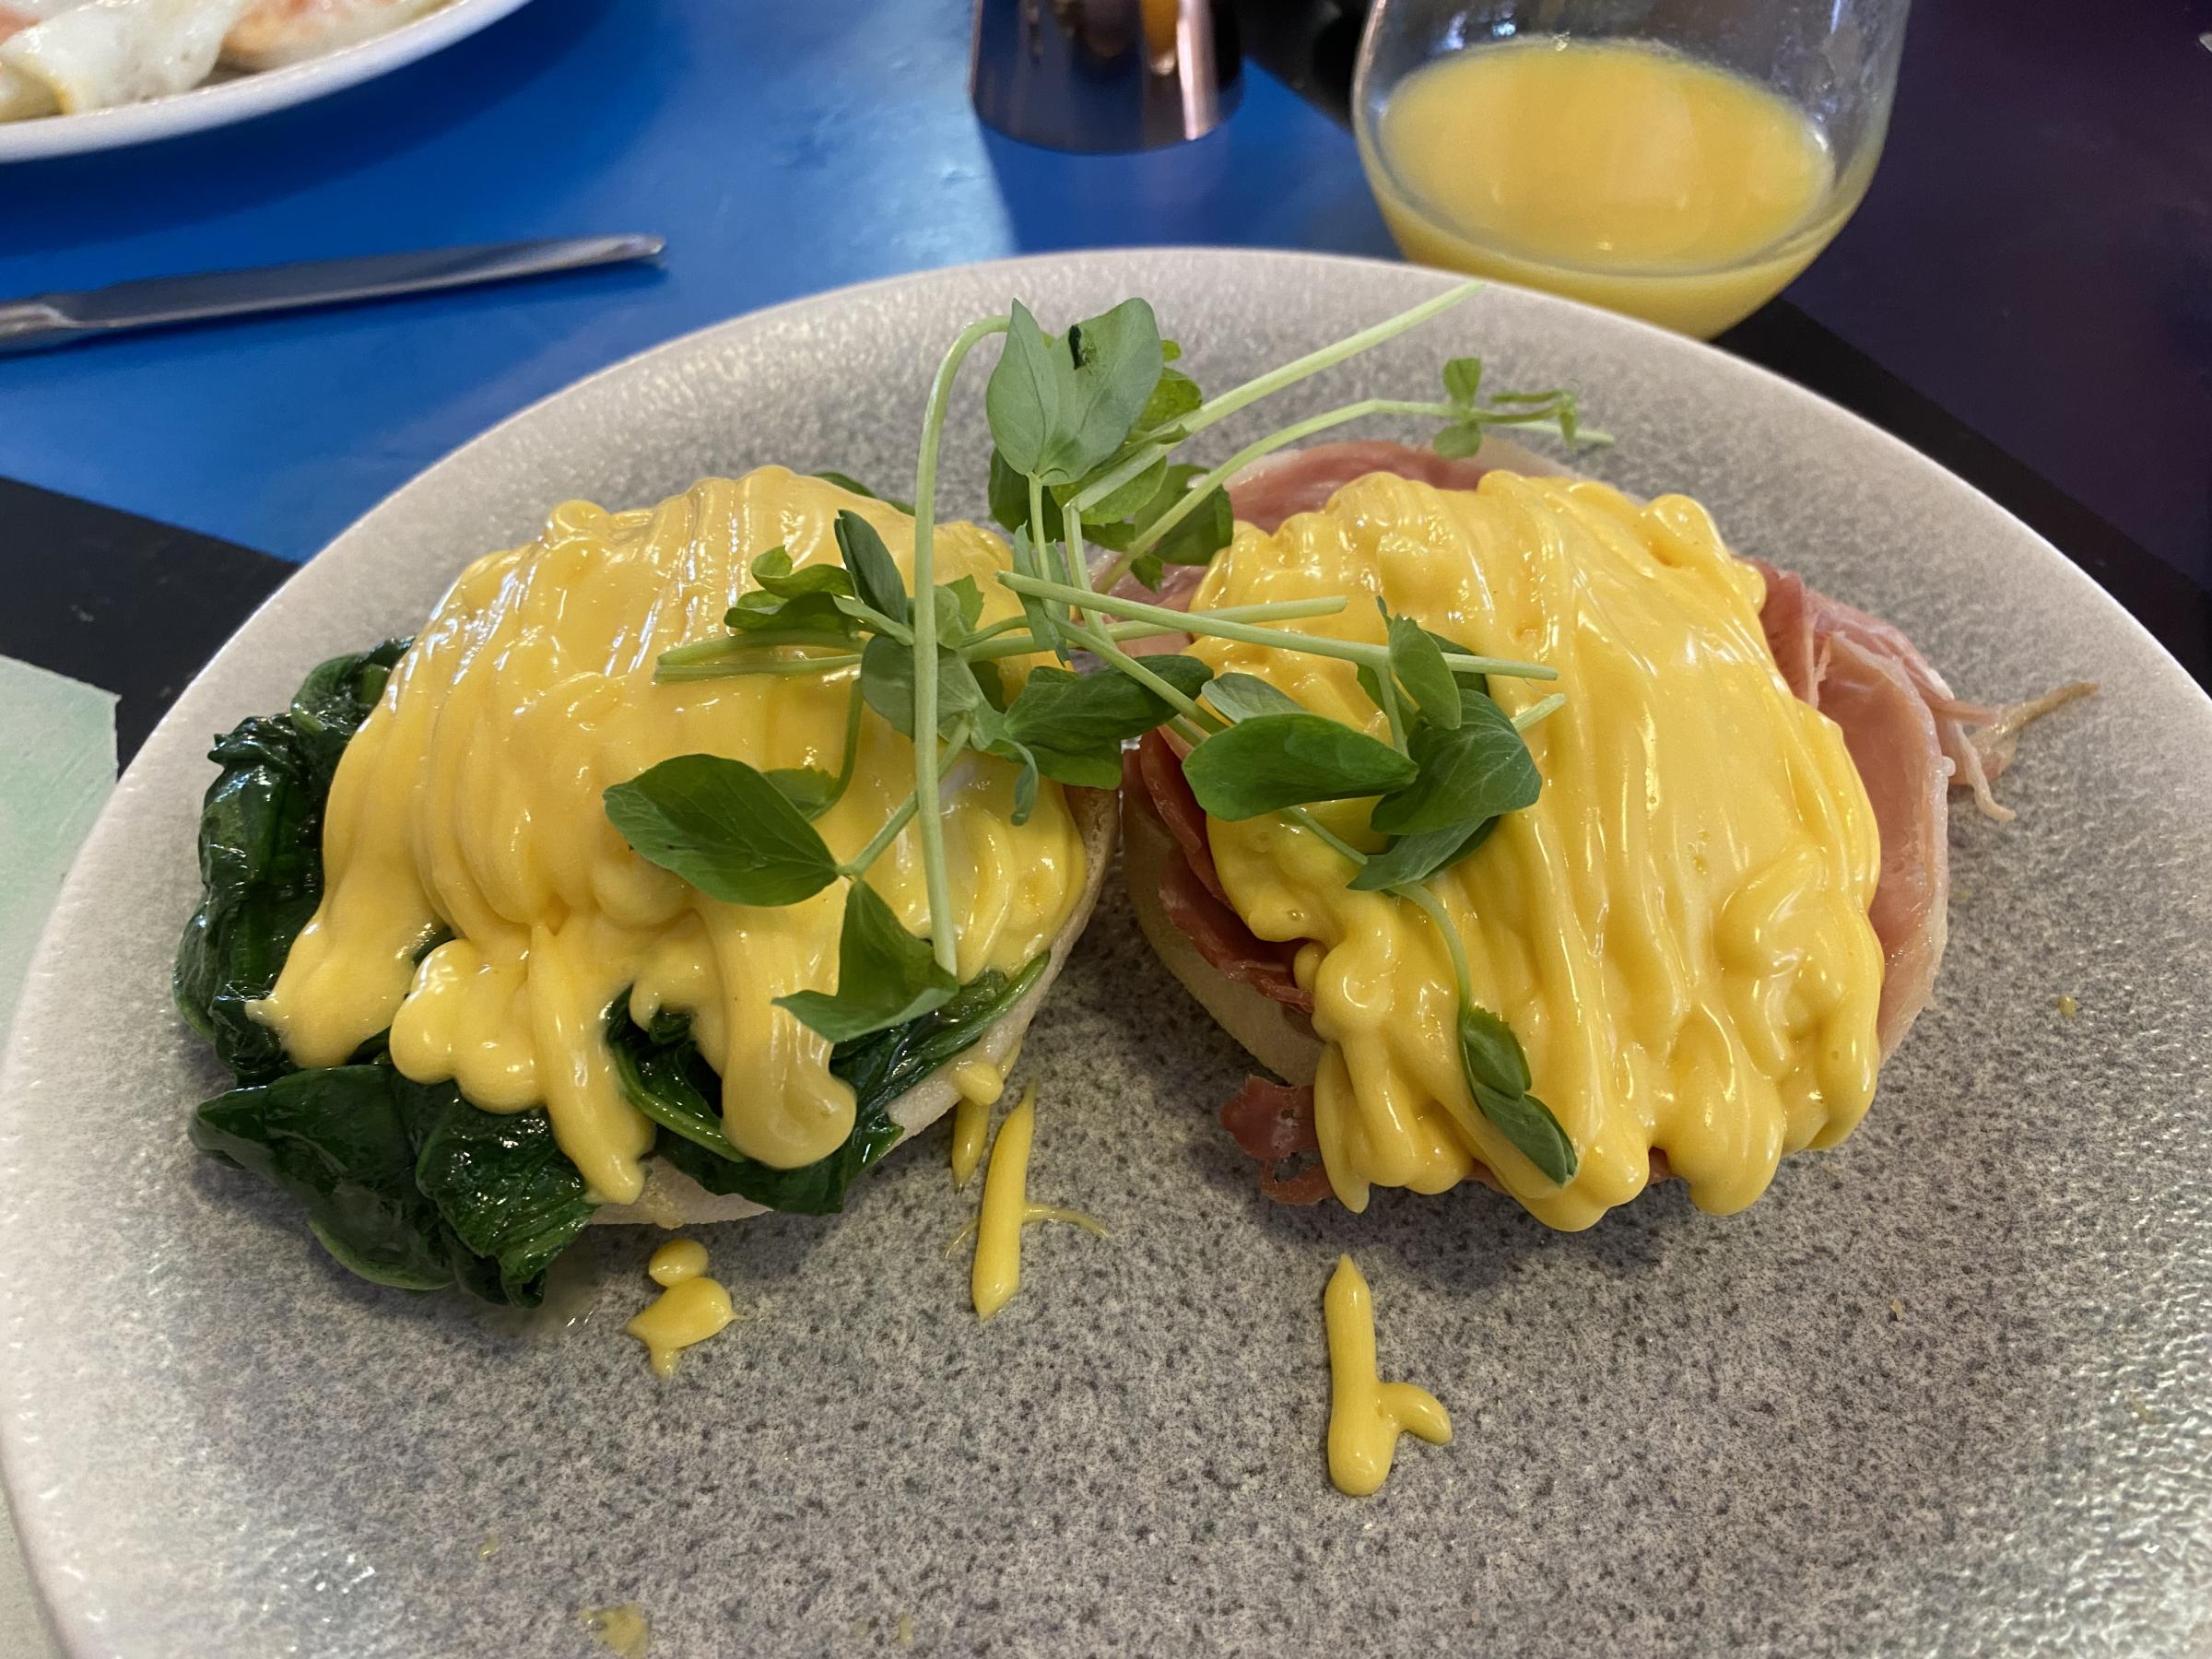 Eggs Benedict/Florentine - the poached eggs for the Benedict were perfect 